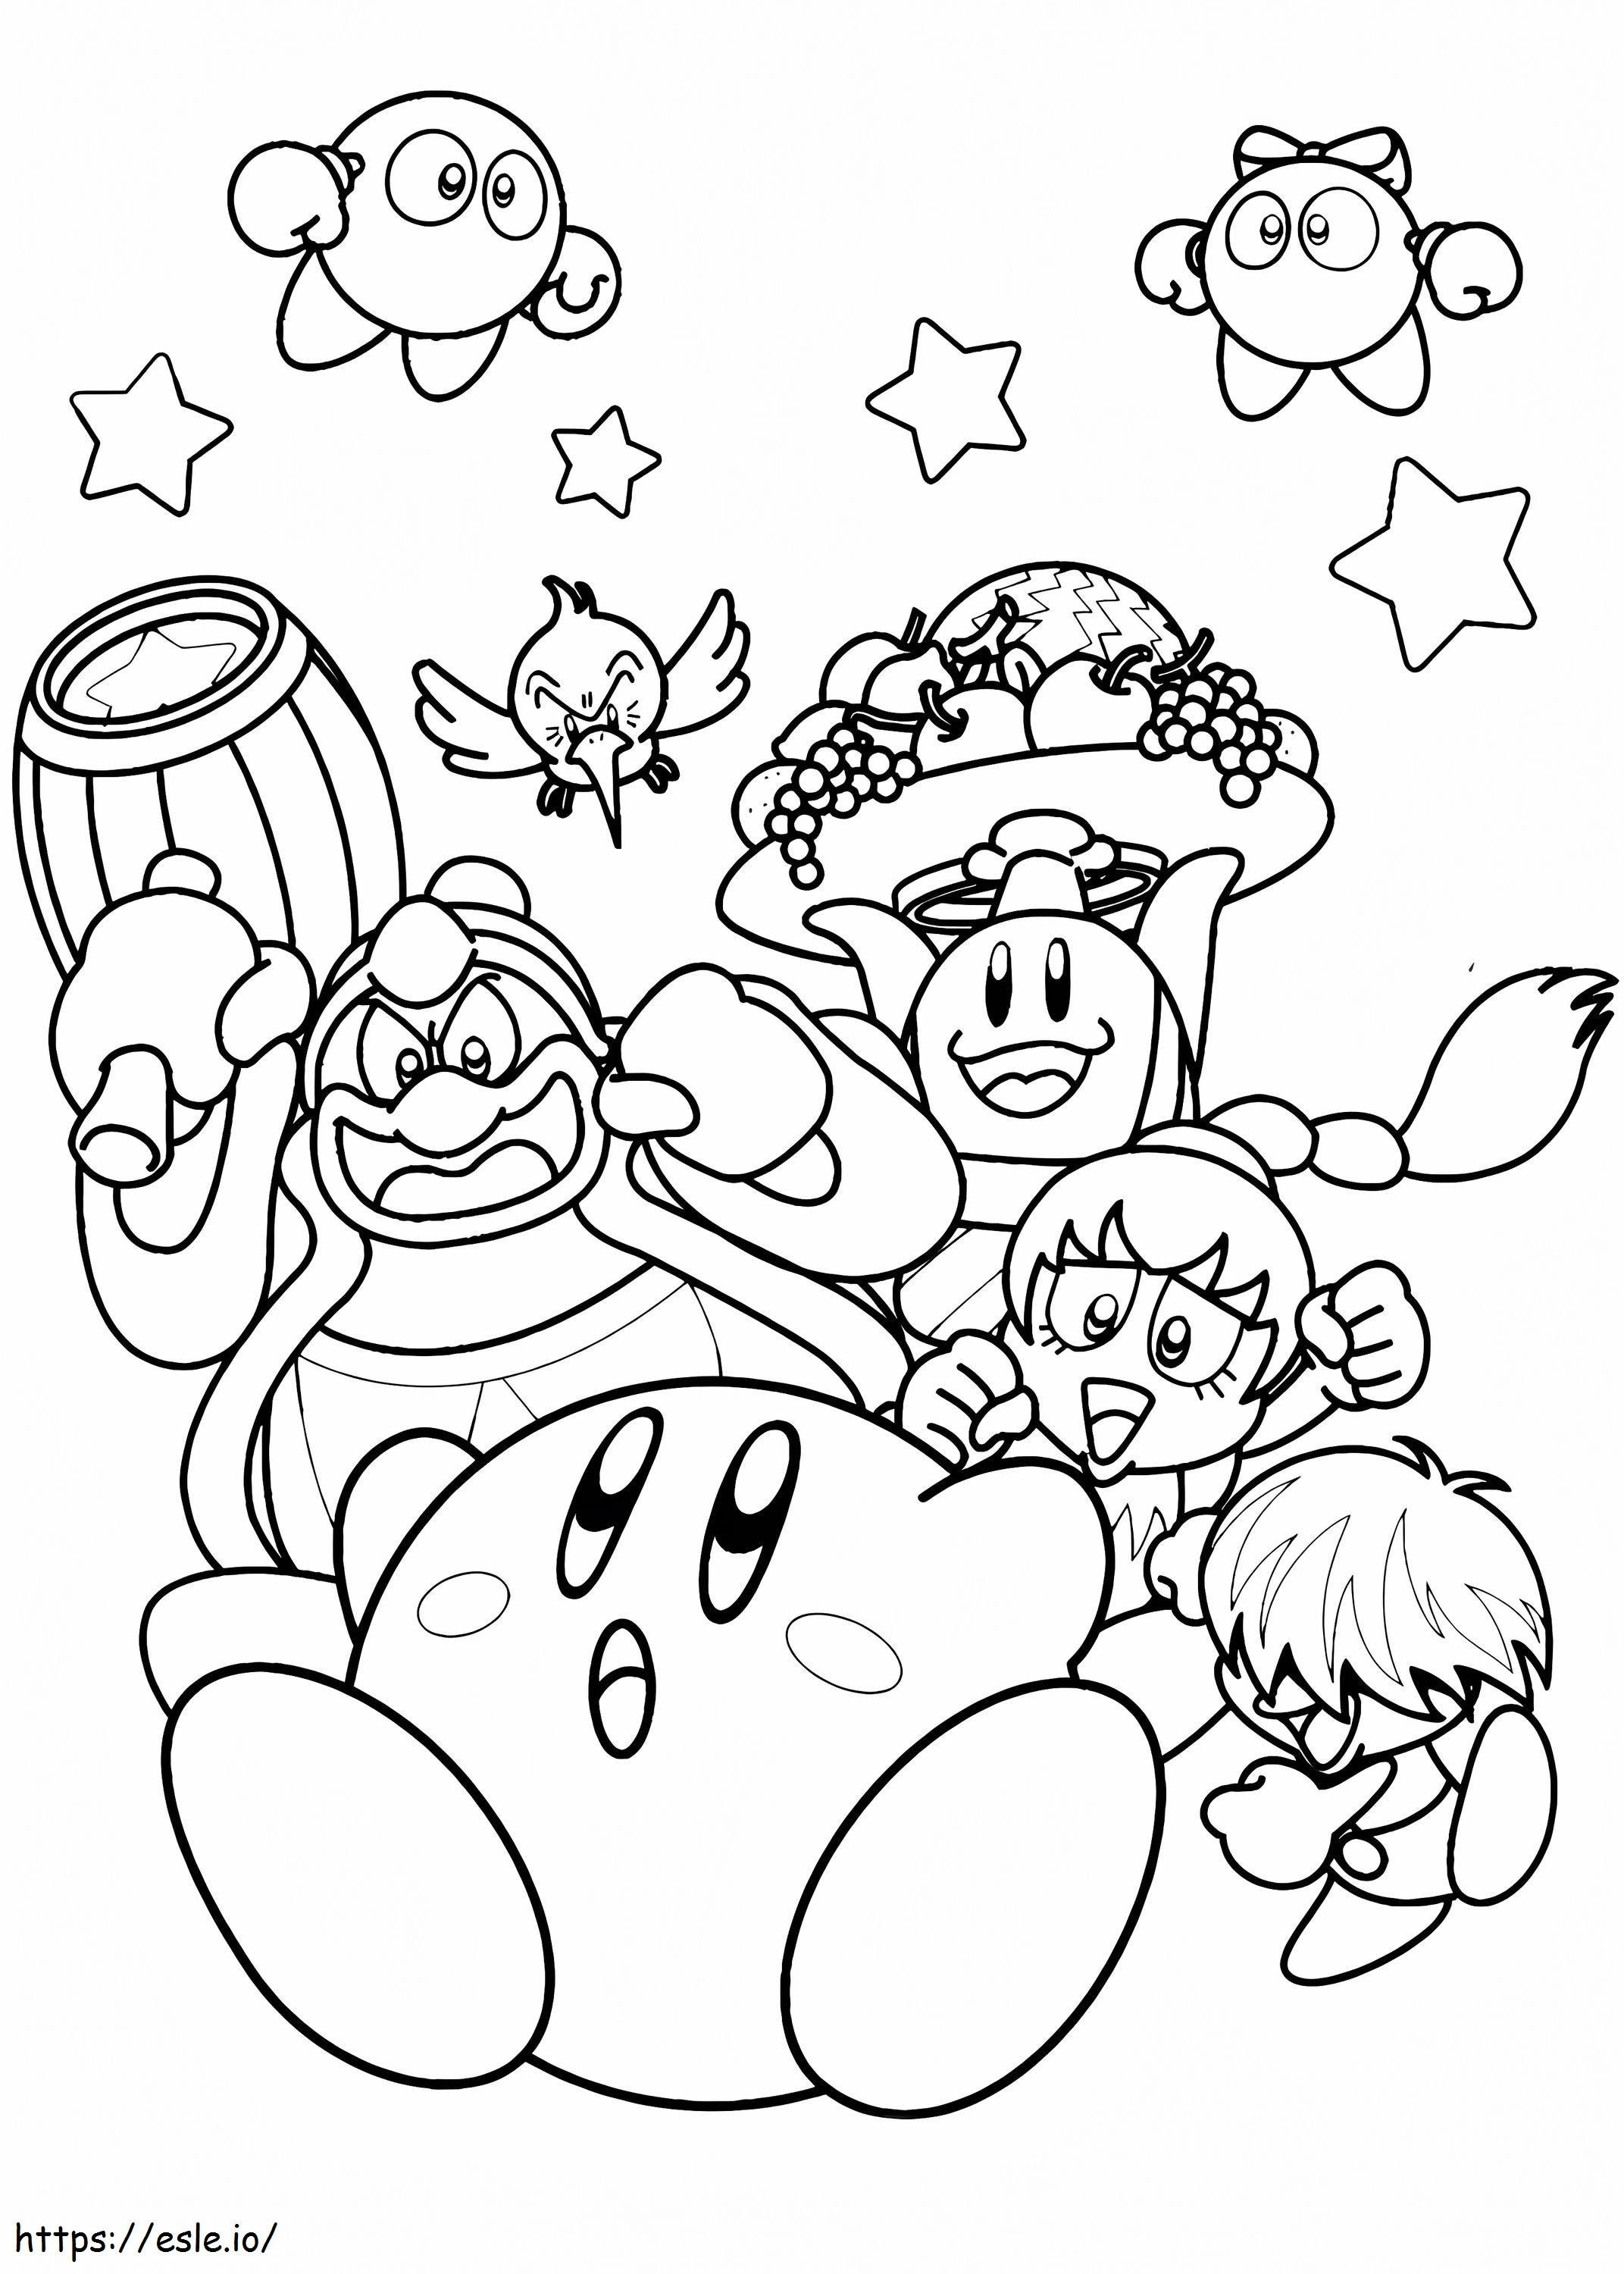 1575687546 Nintendo Kirby coloring page